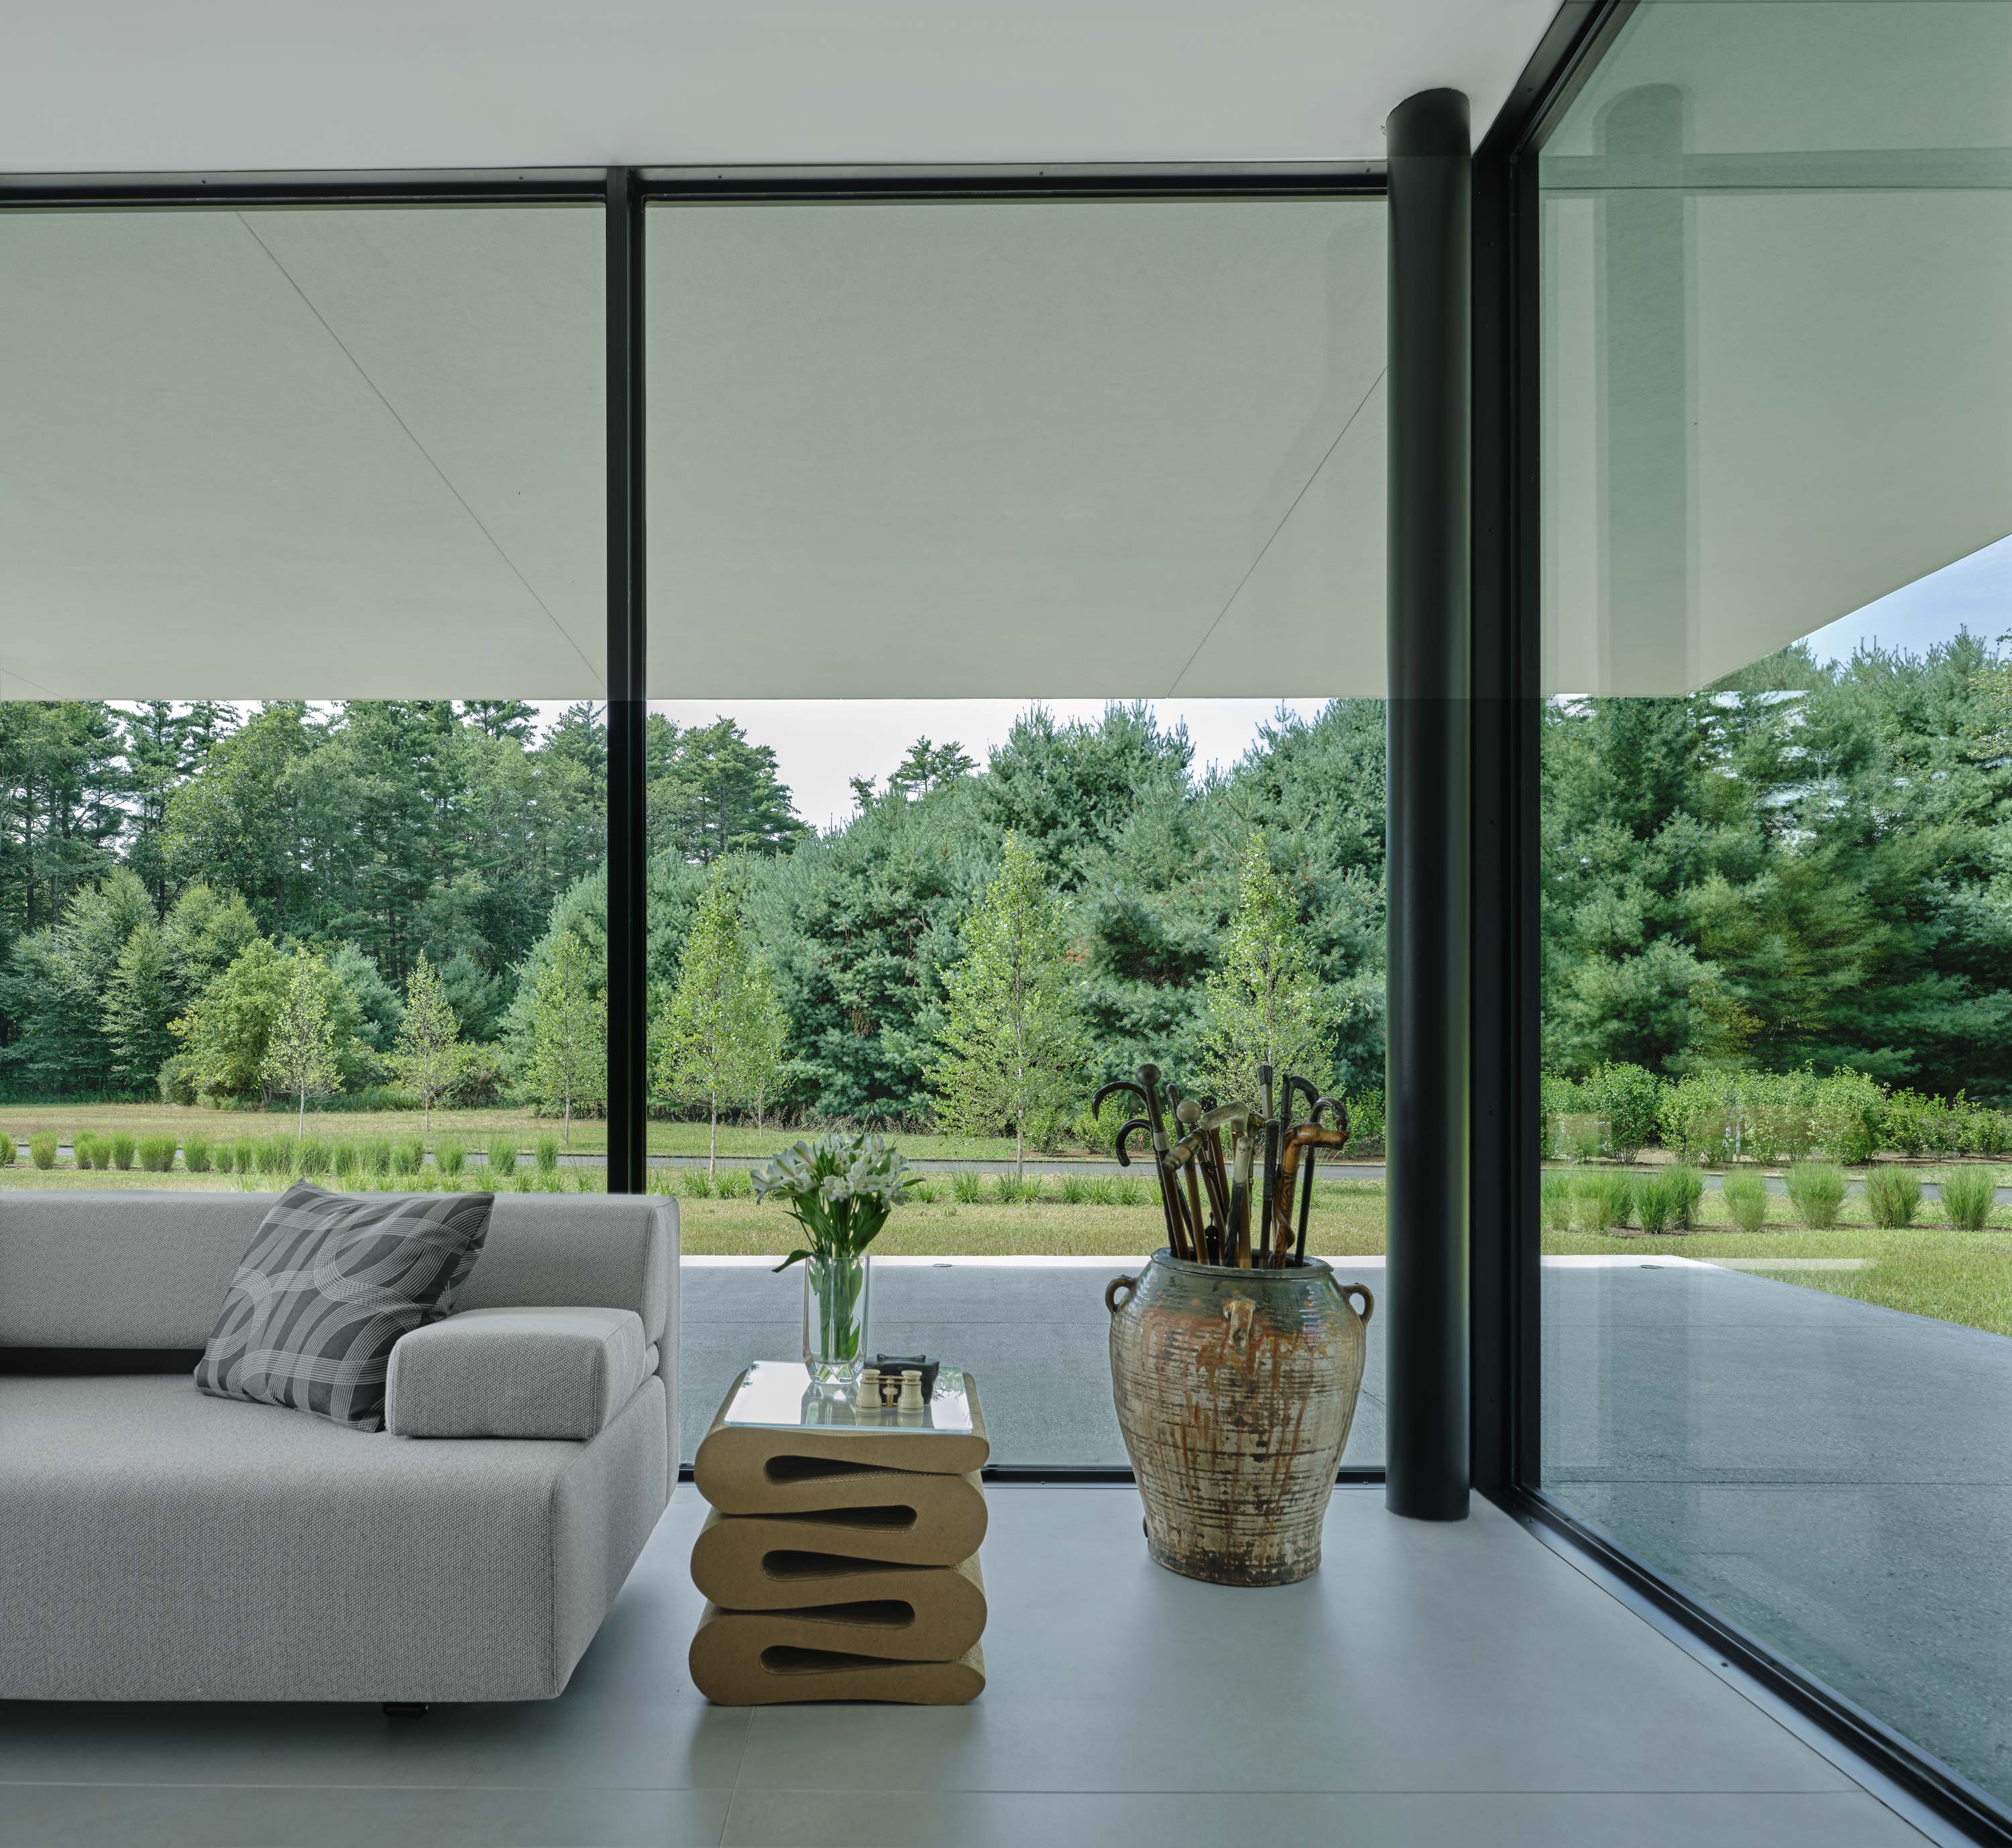 Interior photo of the Casa Annunziata Residence by Specht Novak Architects. Shot by Dror Baldinger, featuring a living space enclosed in glass walls displaying the lush greenery that surrounds the home.